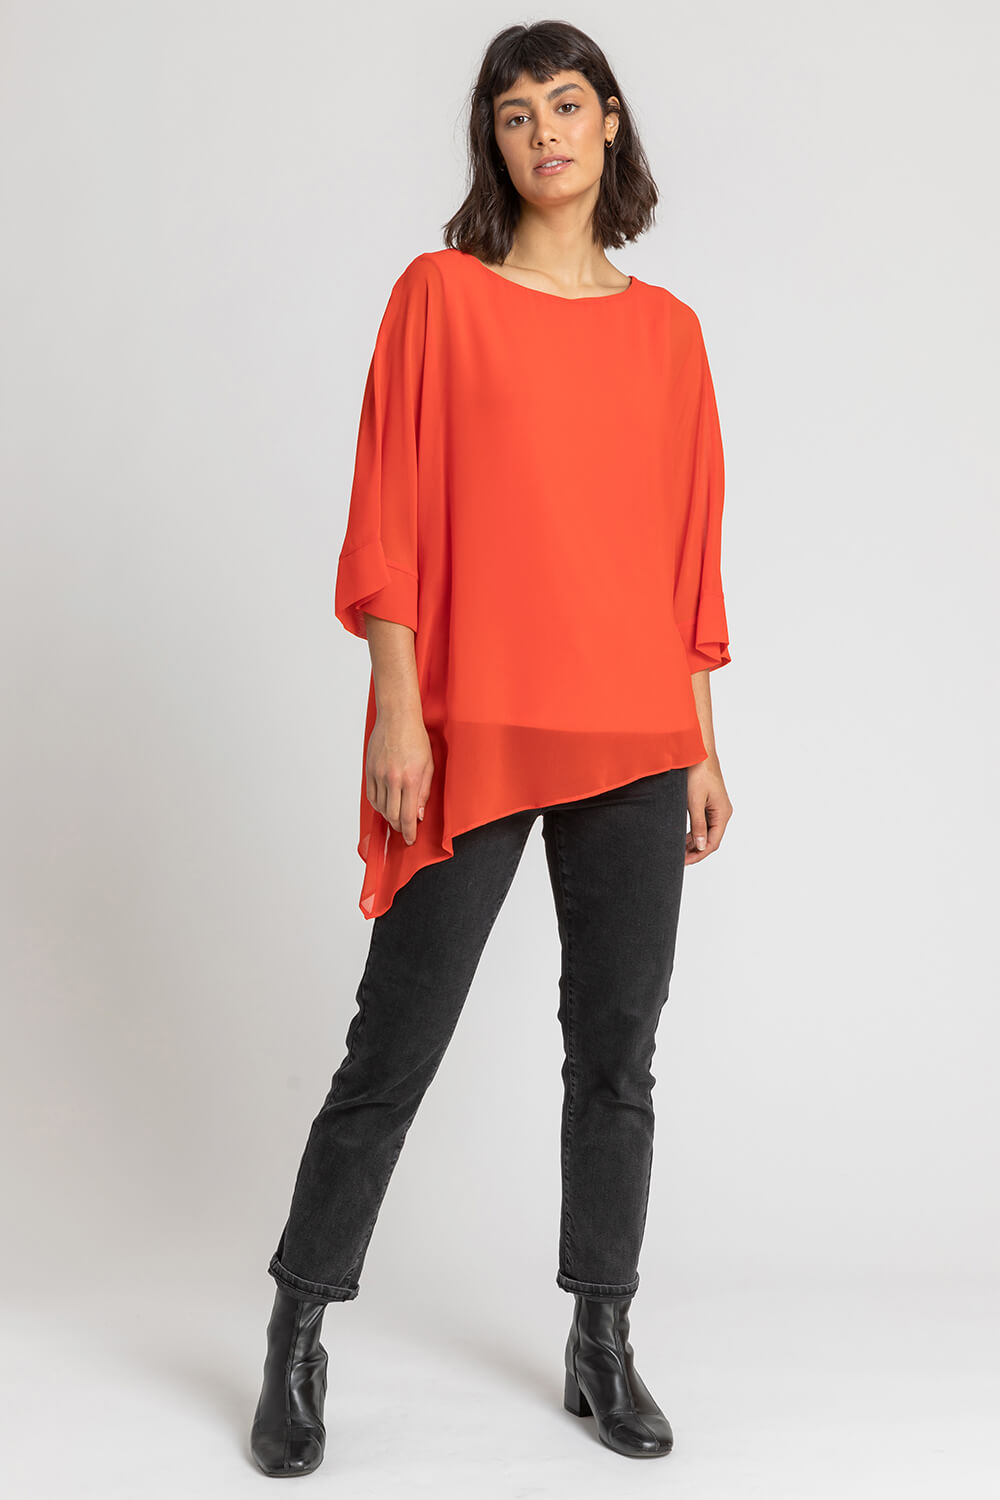 Red Asymmetric Chiffon Overlay Top, Image 3 of 4